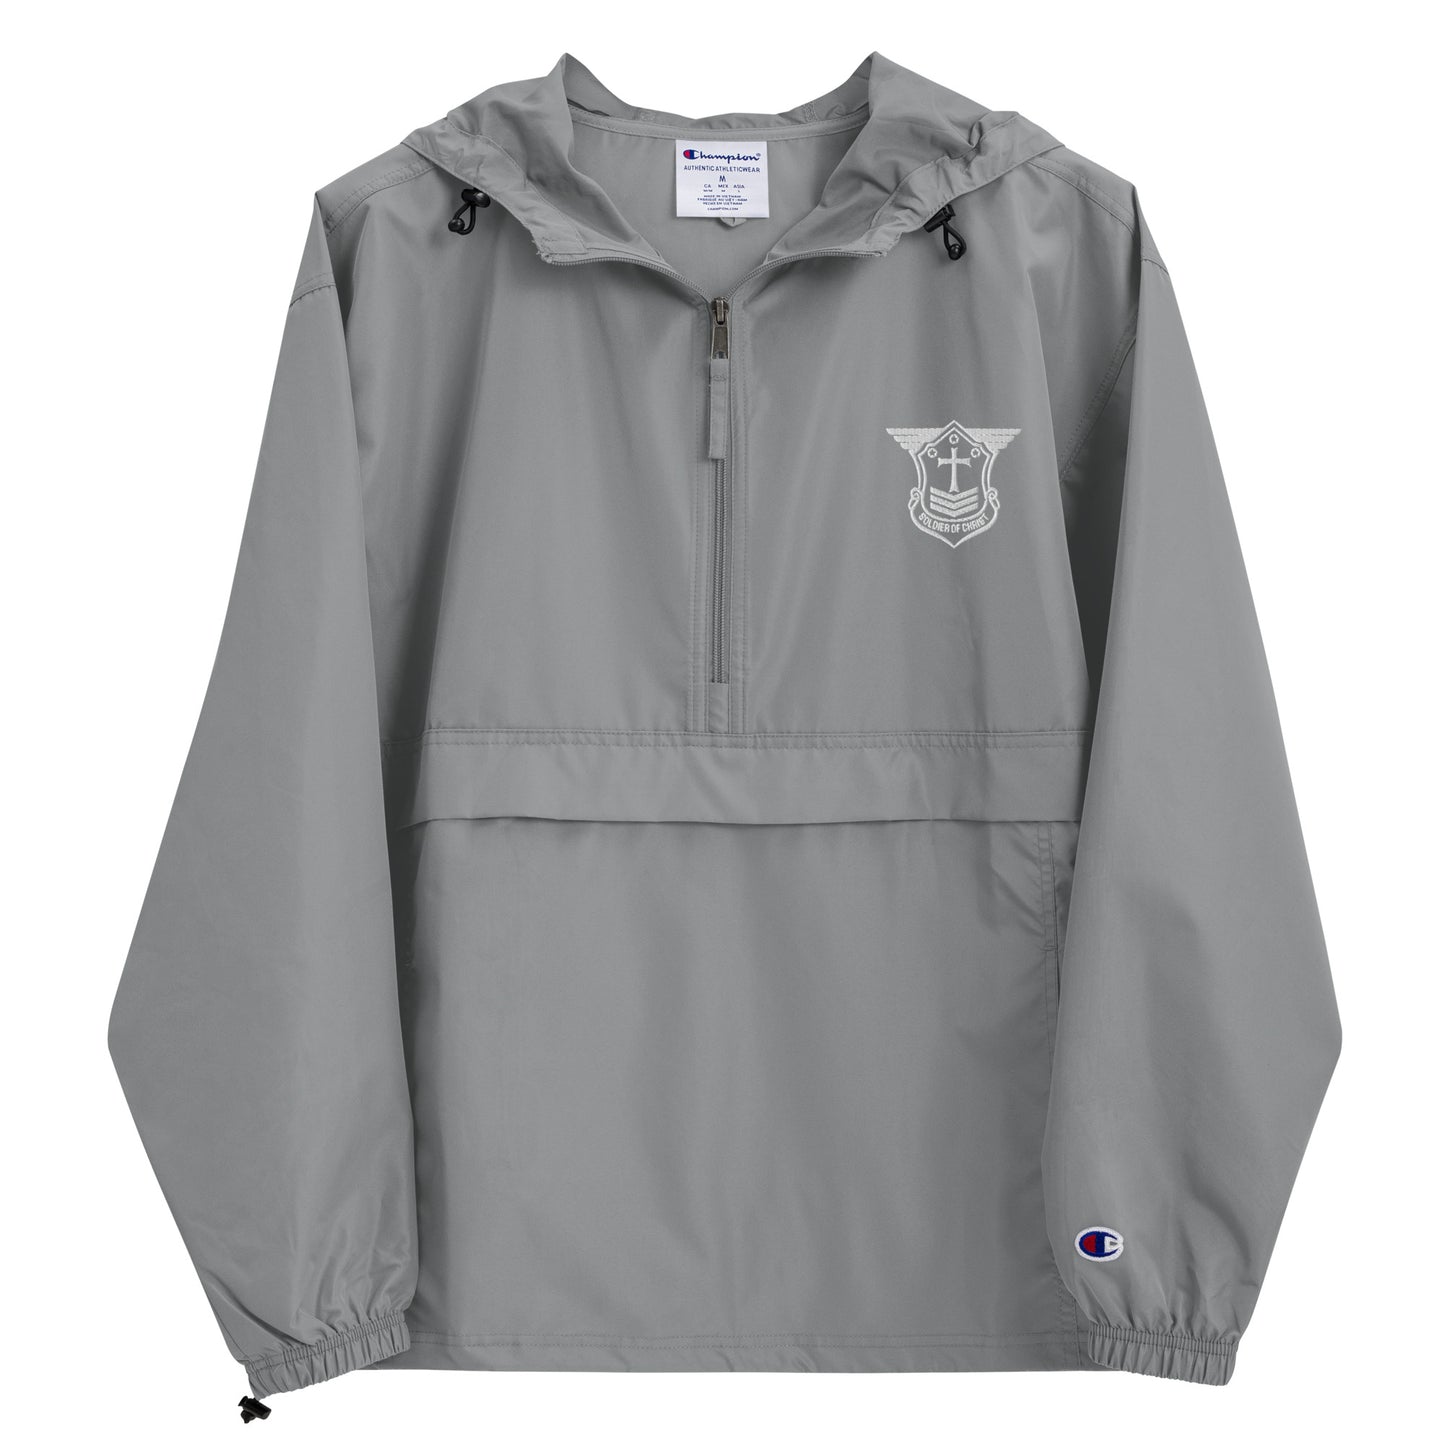 Unisex Champion Packable Golf Jacket with White Embroidered Soldier of Christ Emblem